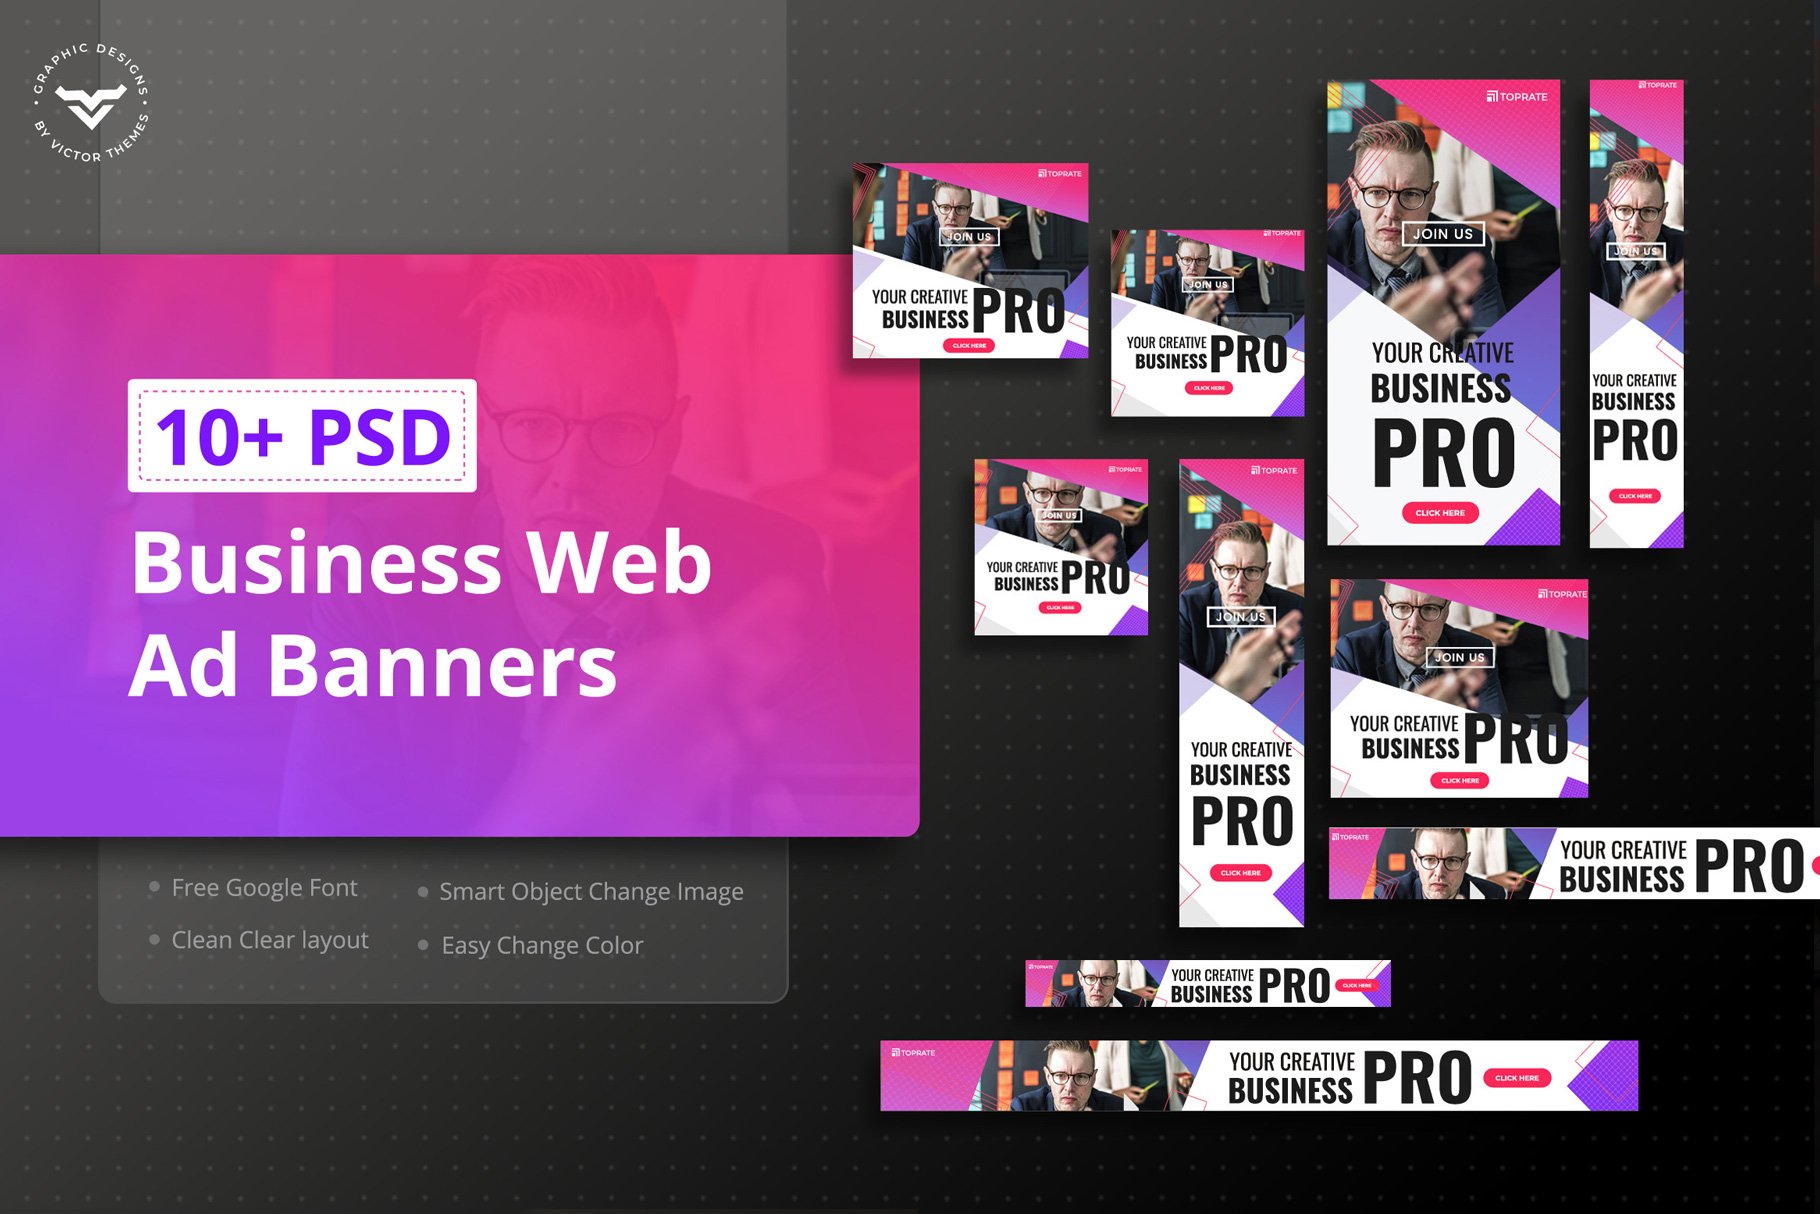 Business Corporate Web Ad's Banner cover image.